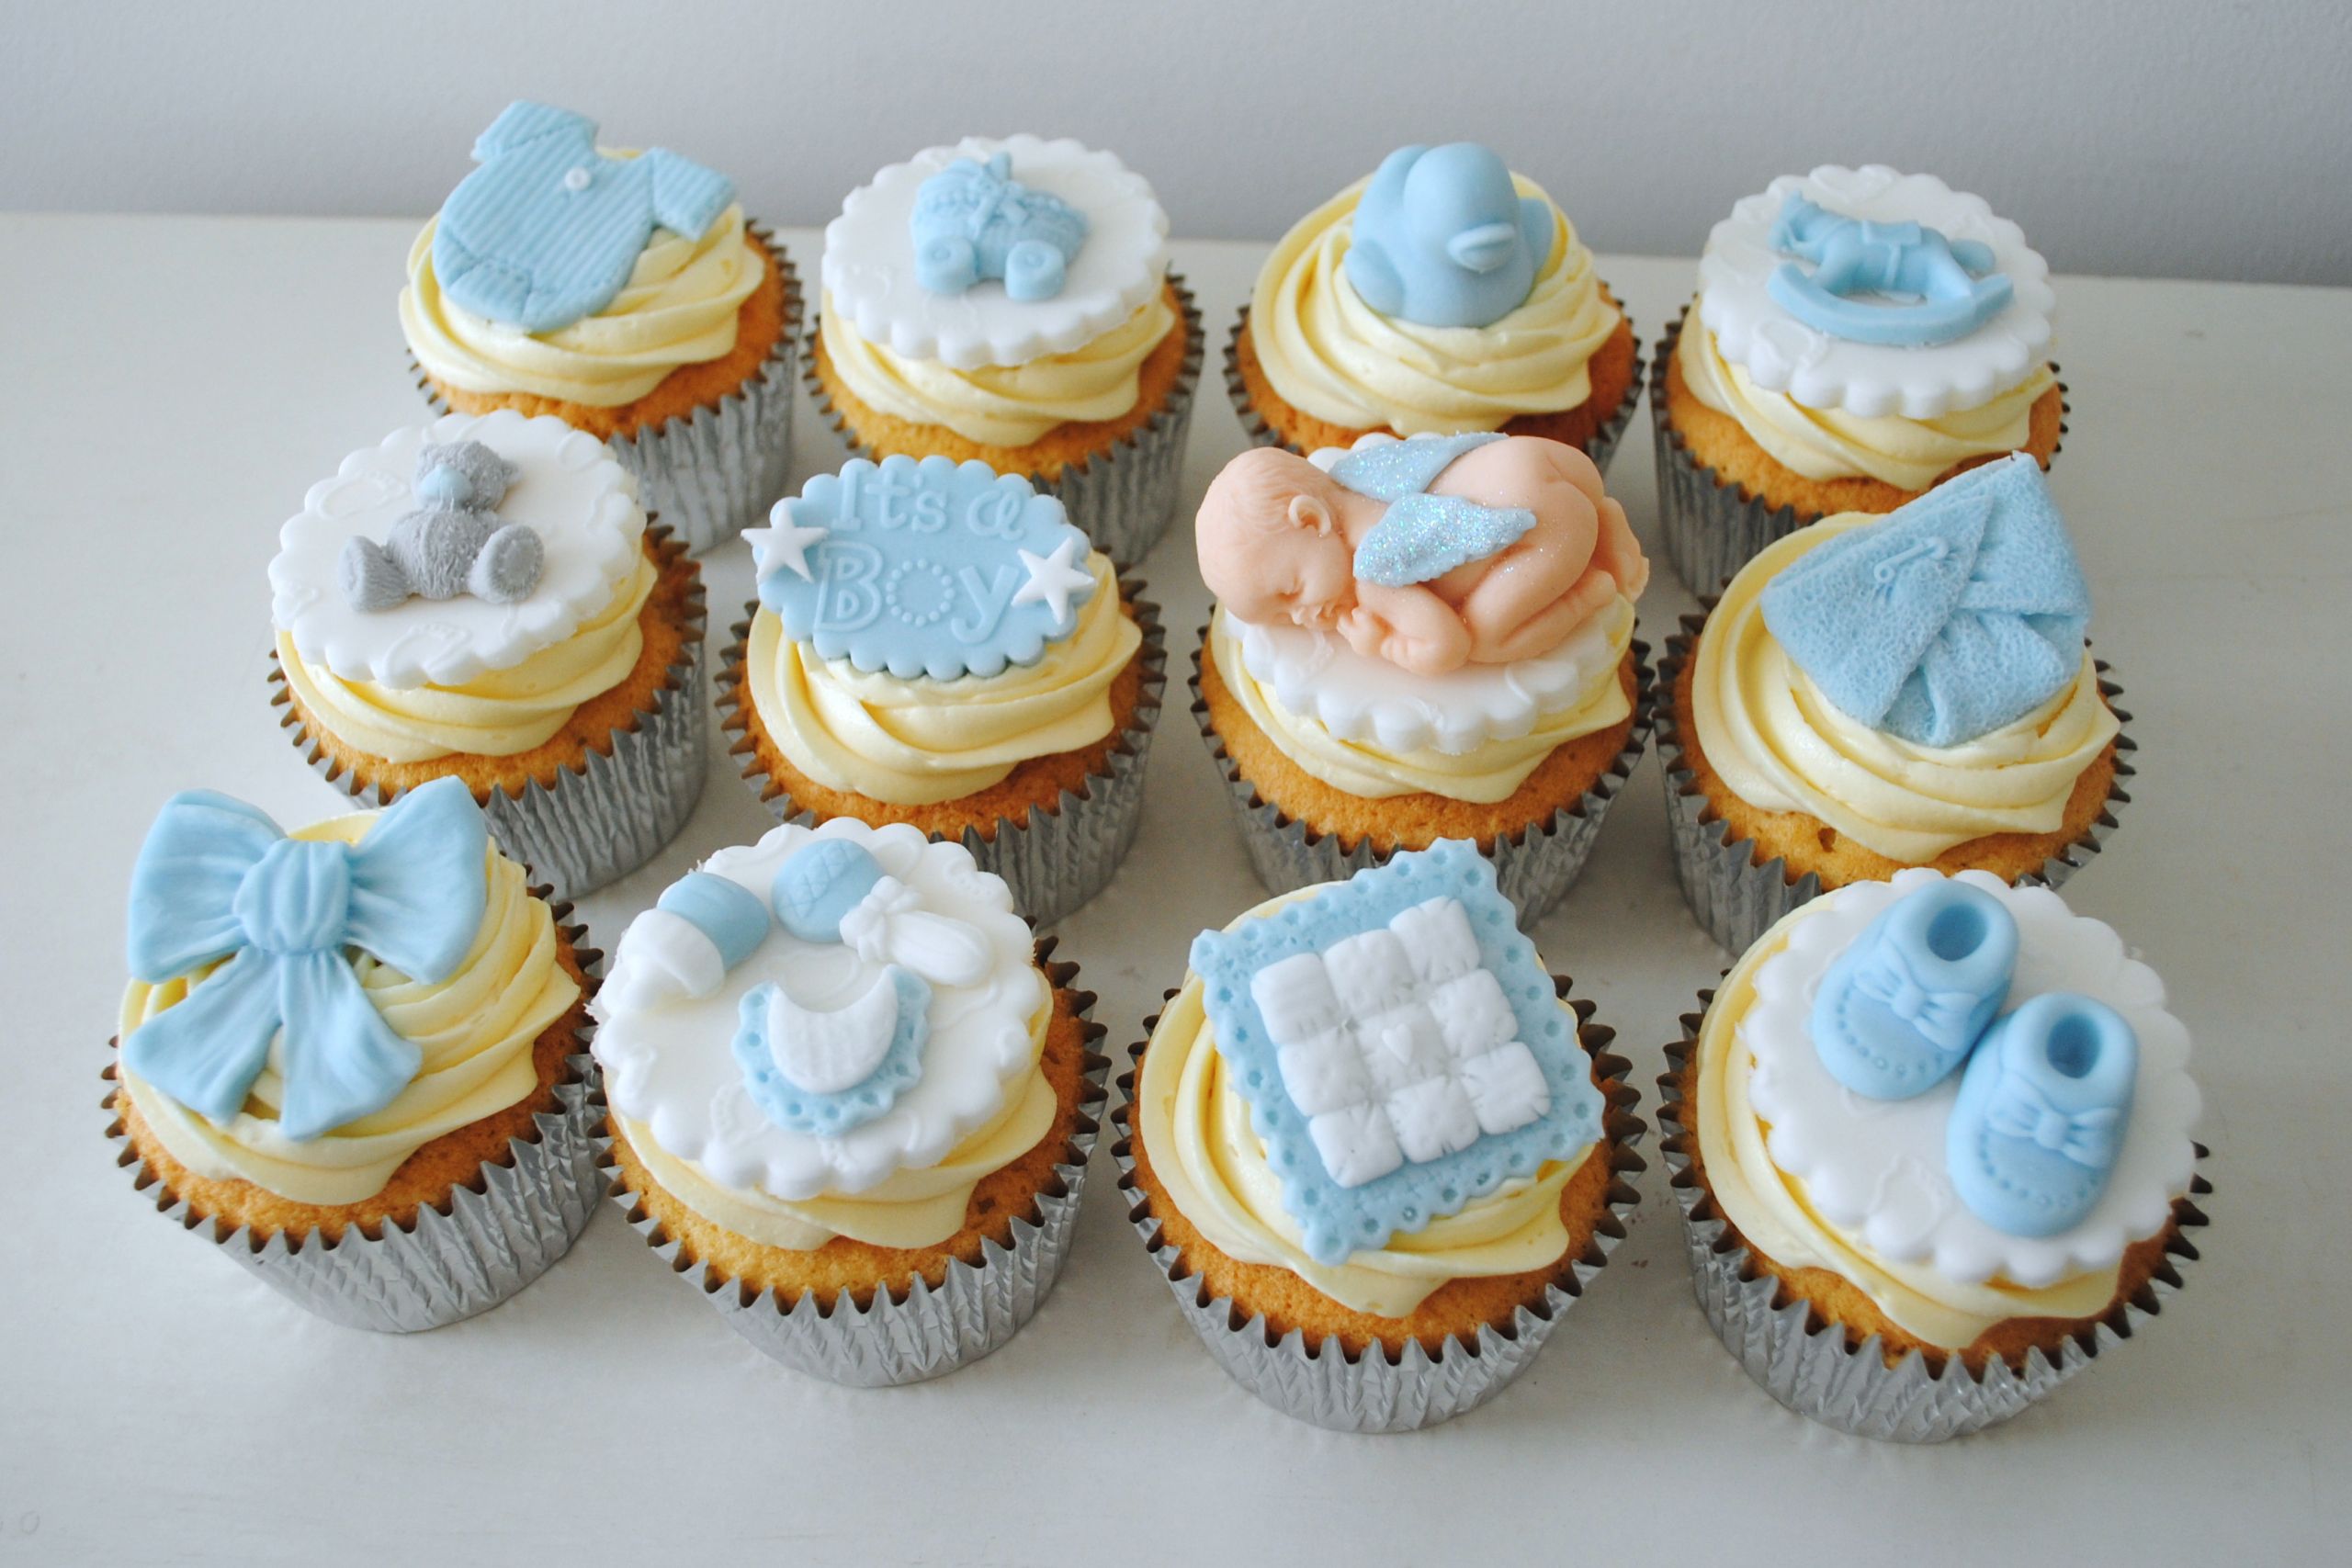 Baby Boy Shower Cupcakes
 Miss Cupcakes Blog Archive Boy Baby Shower cupcakes 12